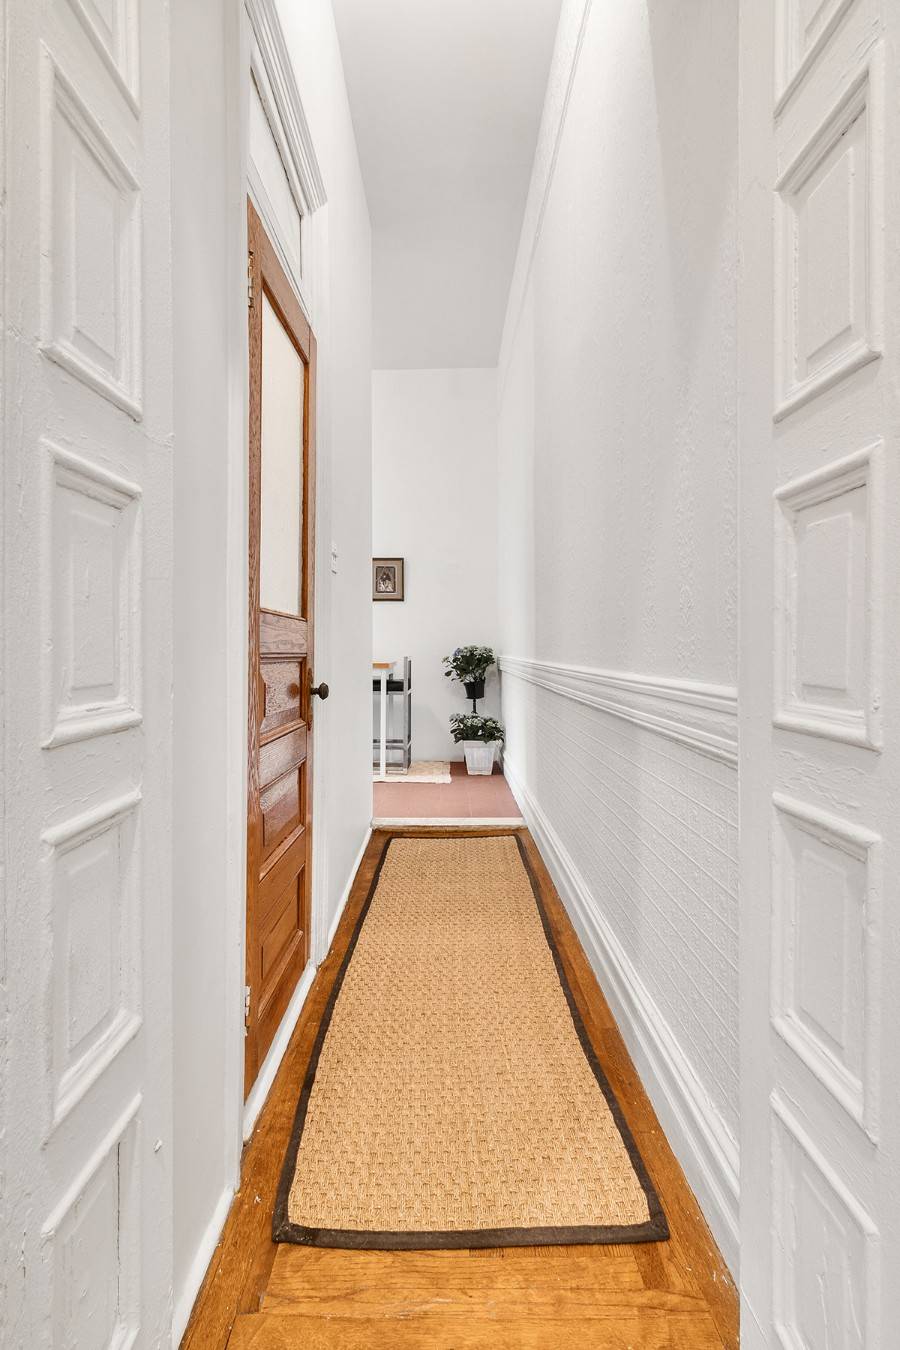 Unit 1B with its Pre War charm and extremely low maintenance is a rare find located only a stones throw away from Tompkins Square Park in the East Village !